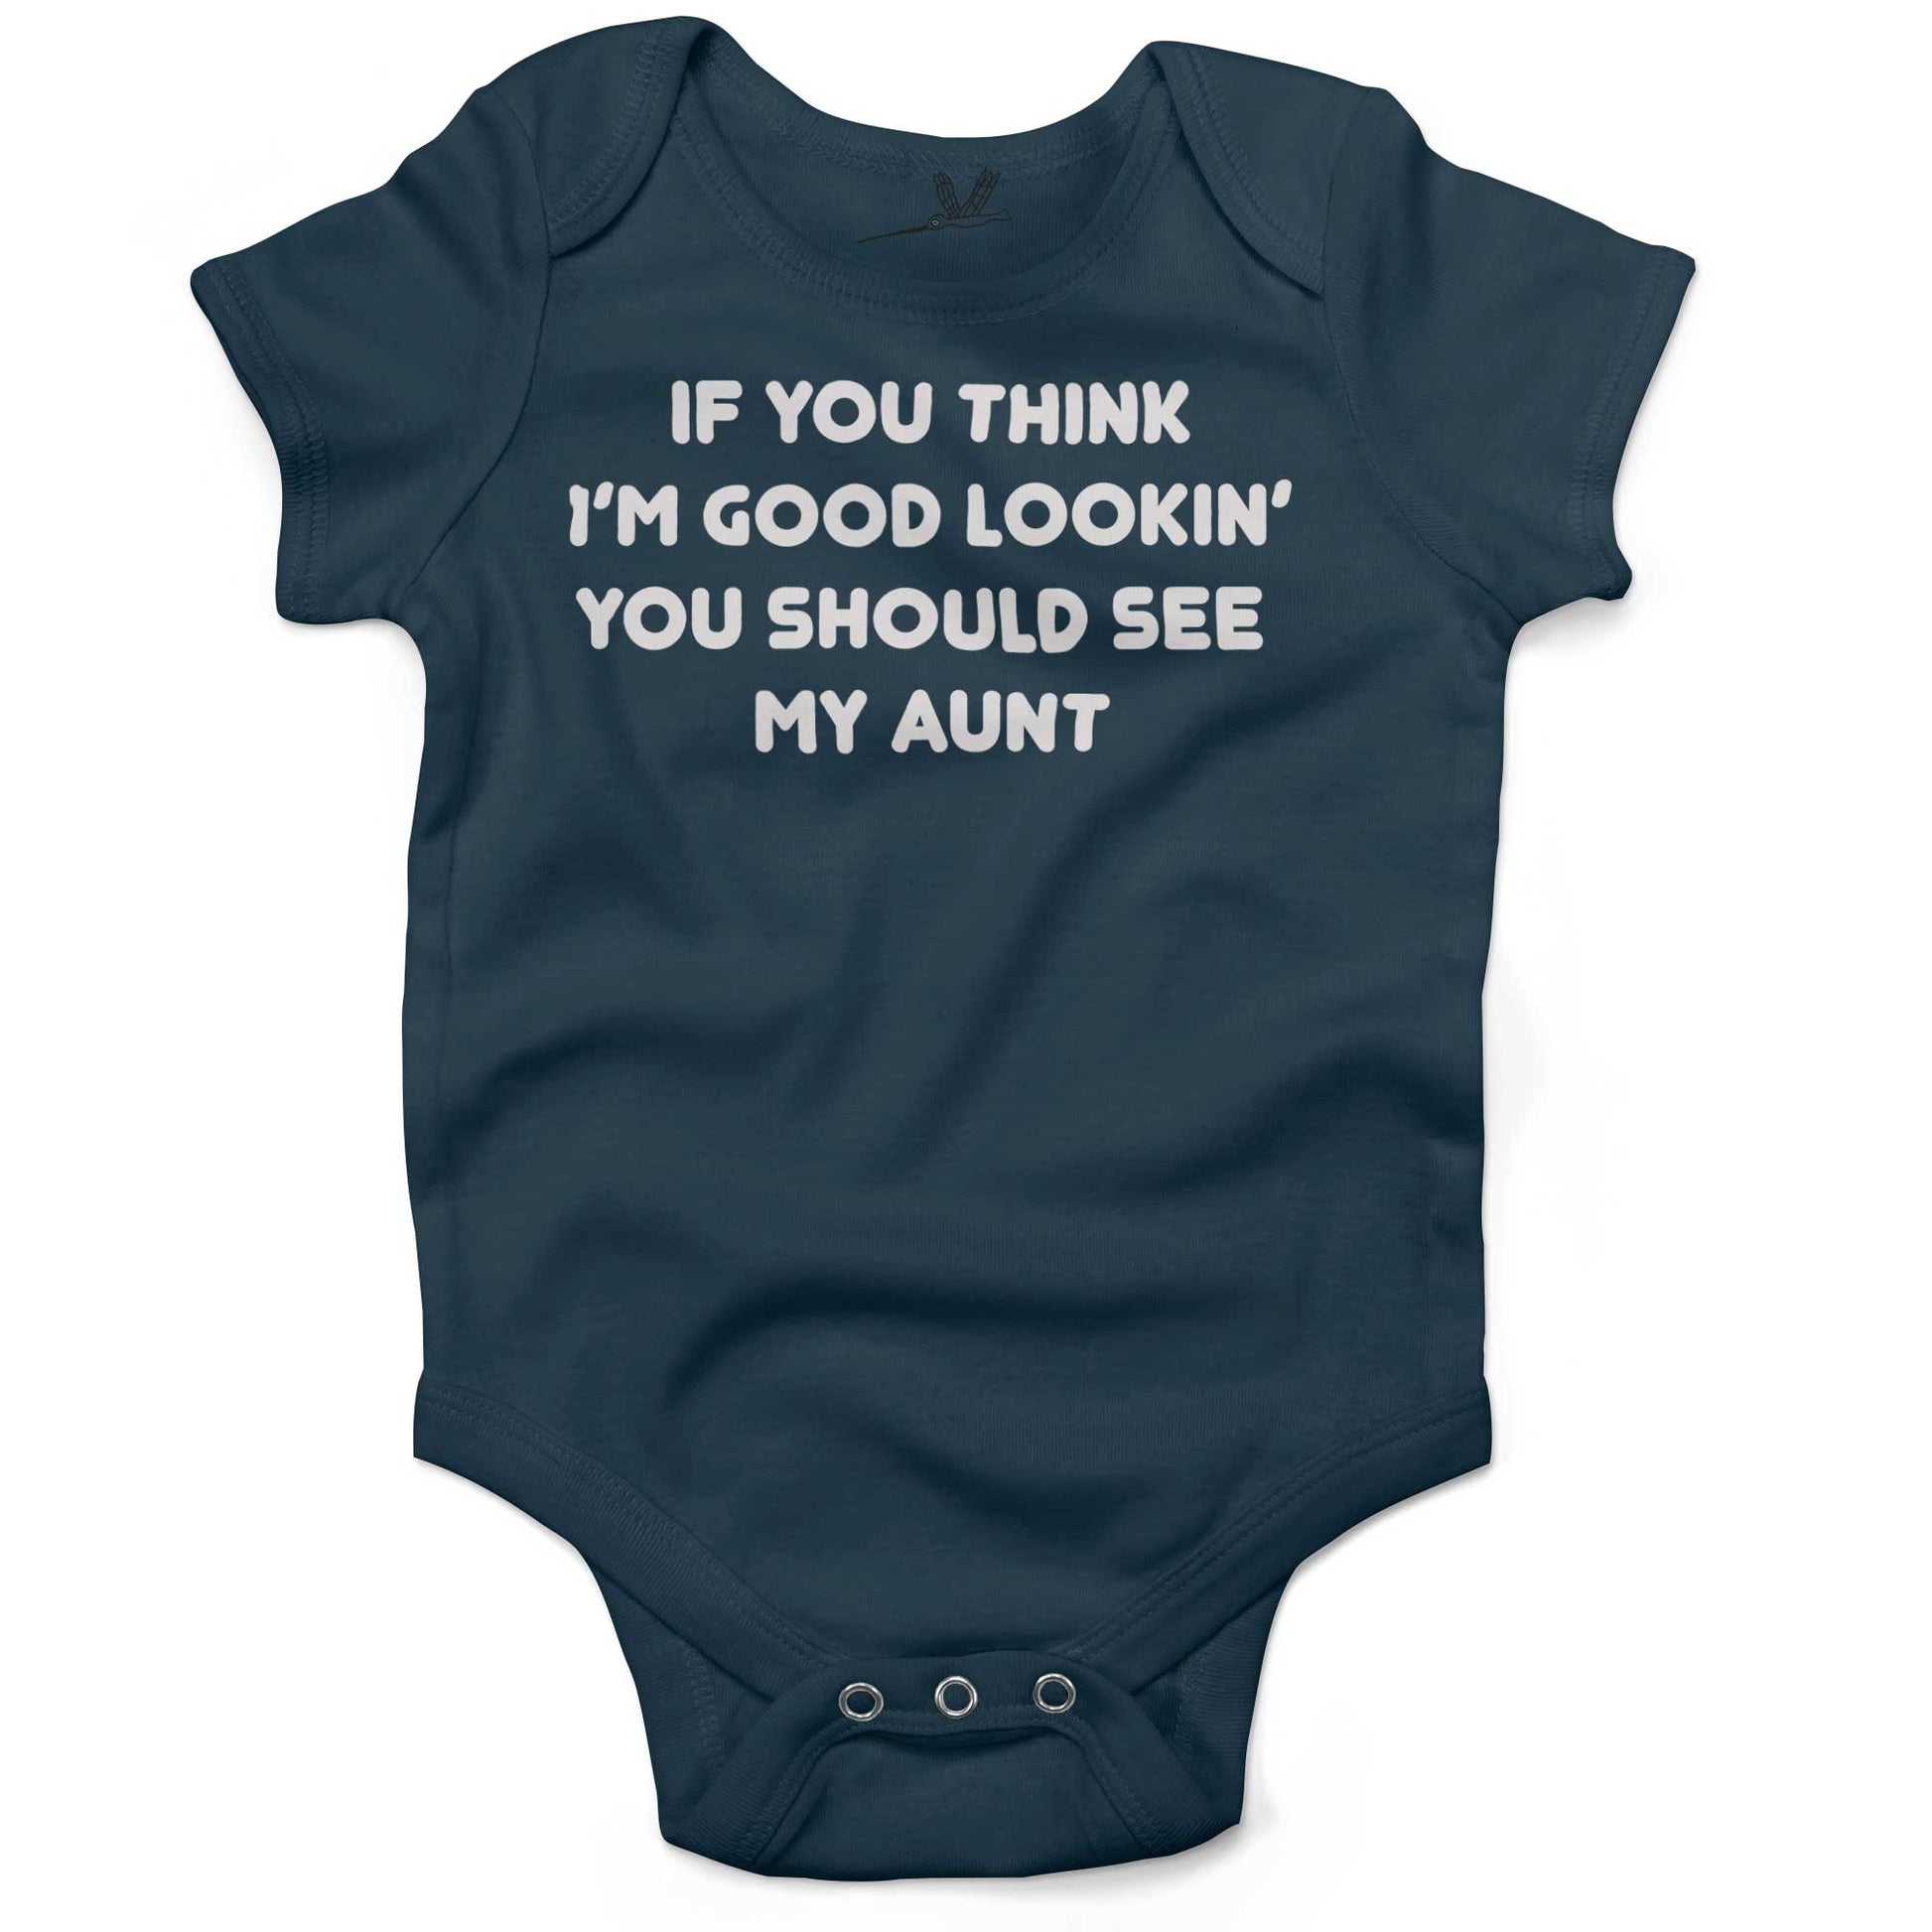 If You Think I'm Good Lookin' You Should See My Aunt Infant Bodysuit or Raglan Tee-Organic Pacific Blue-3-6 months